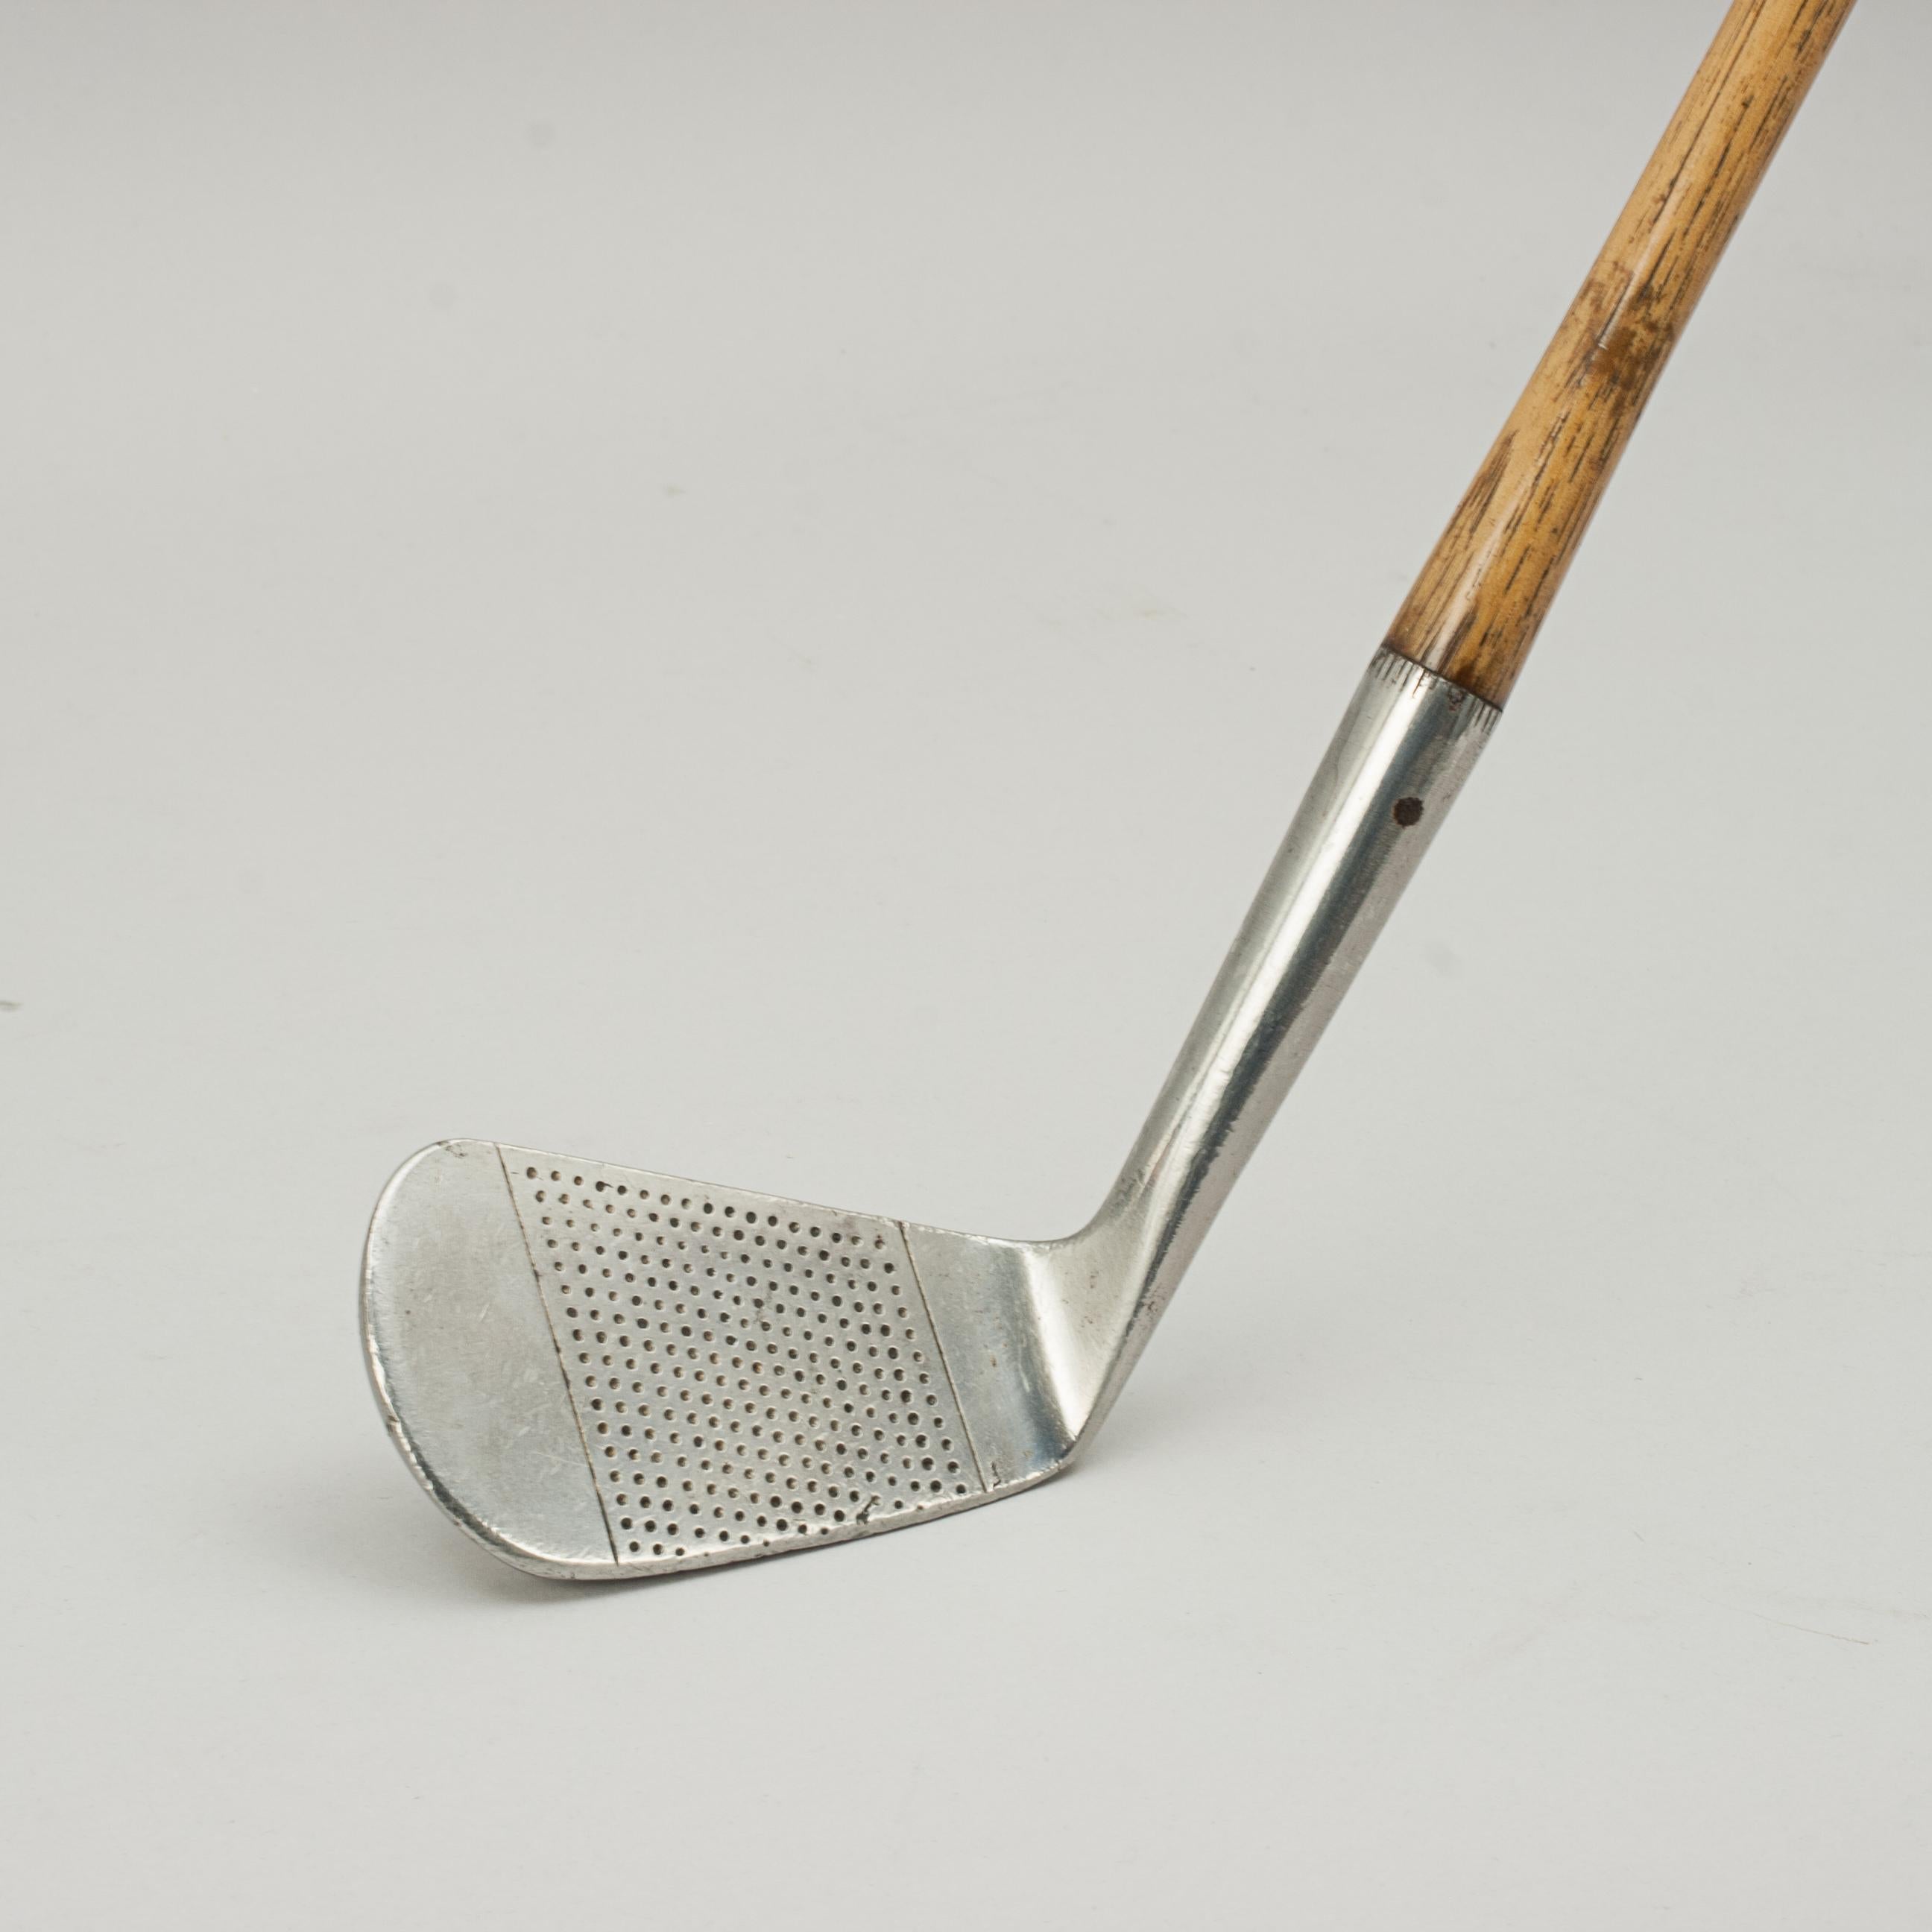 Vintage Hickory Golf Club, George Nicoll, Leven.
A fine and nicely weighted dot punched faced spade mashie by George Nicoll, Leven. The hickory shaft with polished leather grip, the club head is stamped with Nicoll's 'hand' cleek mark, 'Rustless,